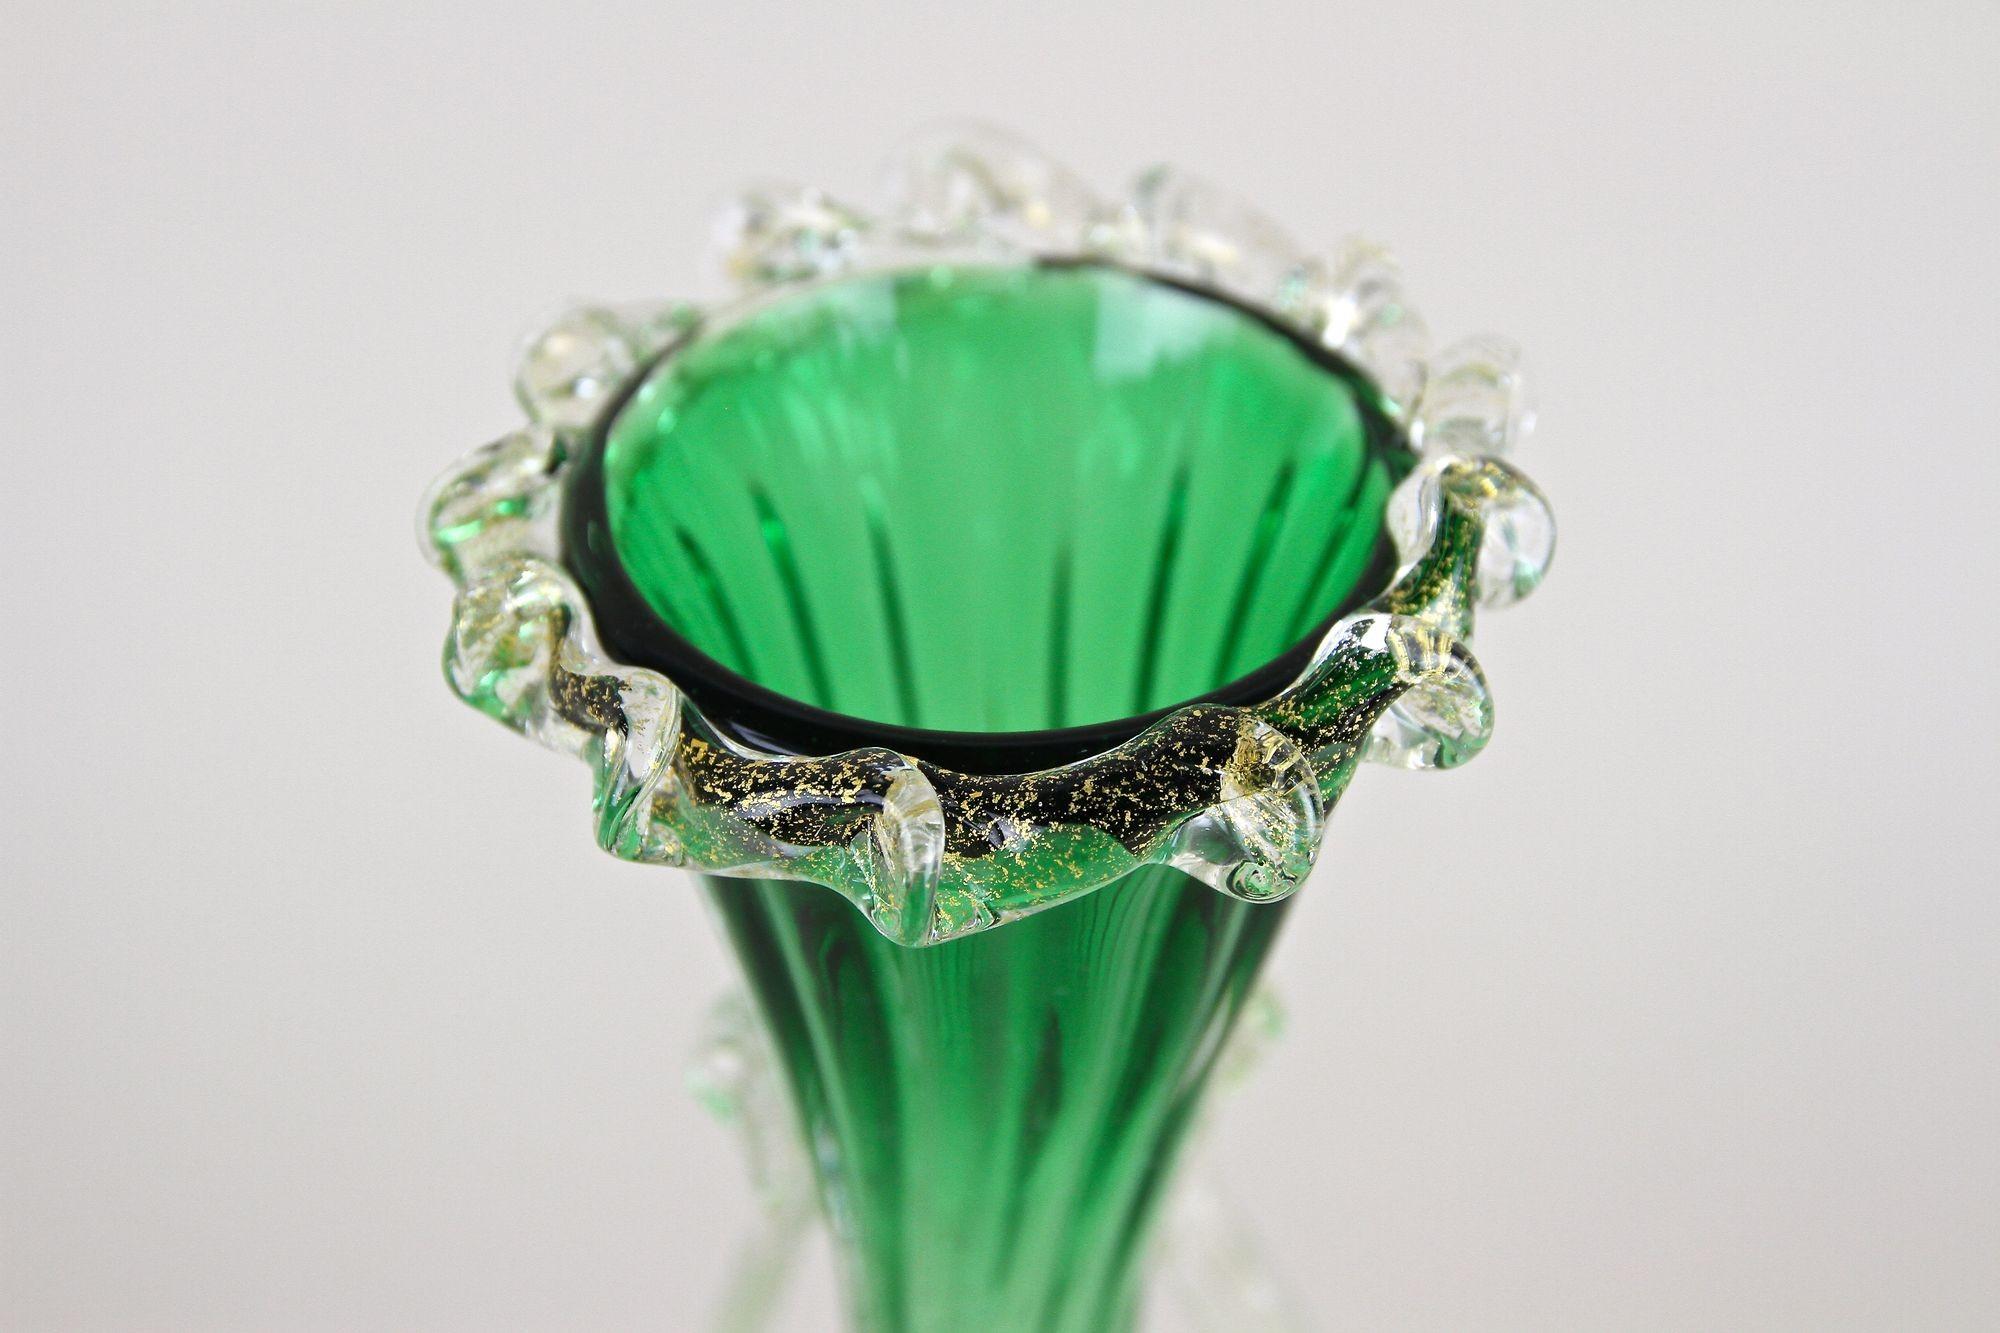 Green/ White Murano Glass Vase With 24k Gold Flakes by Fratelli Toso, IT ca 1930 For Sale 10